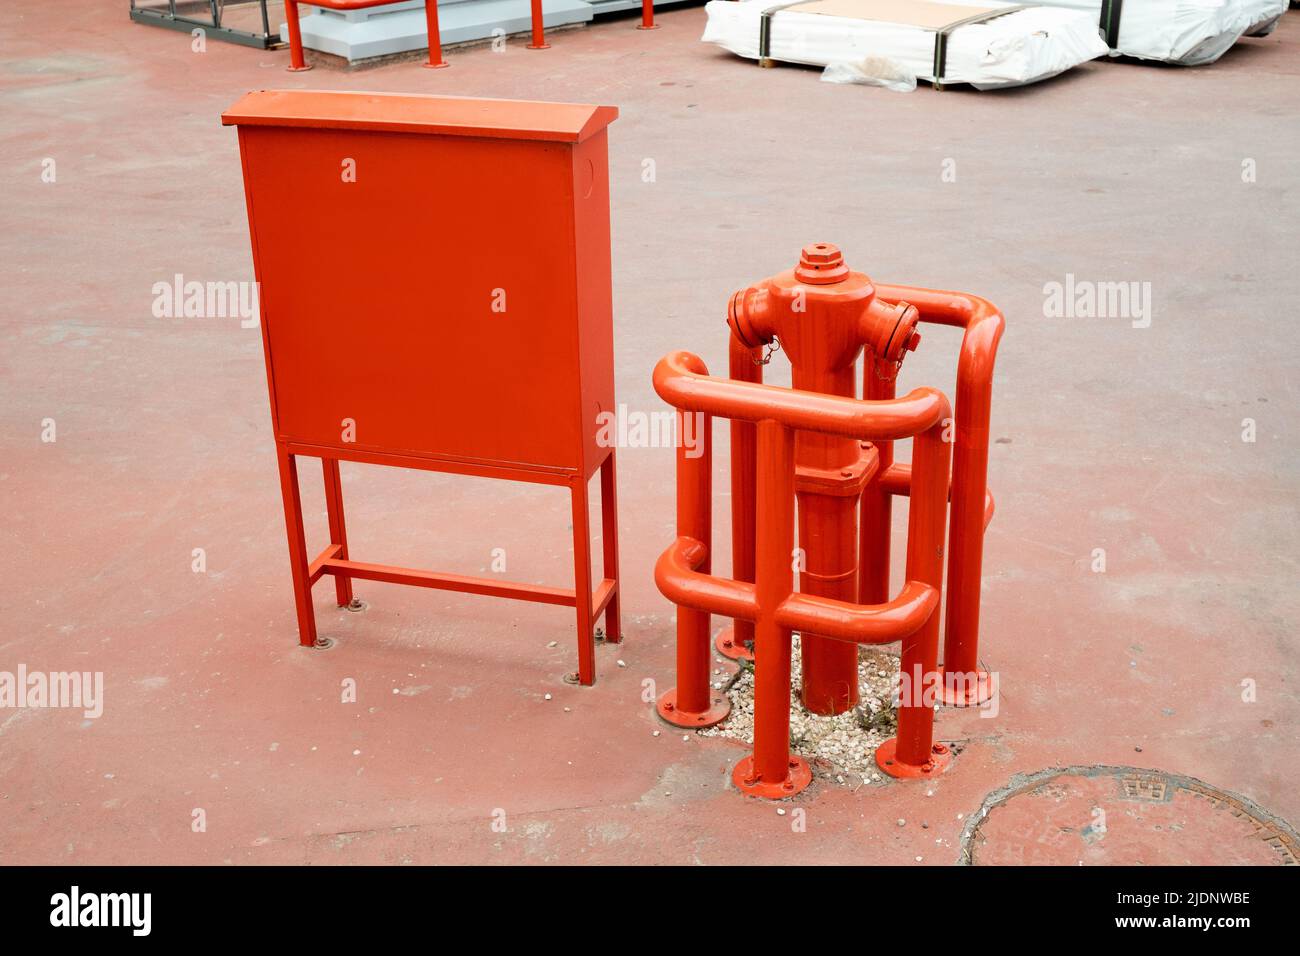 fire hydrant and rescue equipment at the street Stock Photo